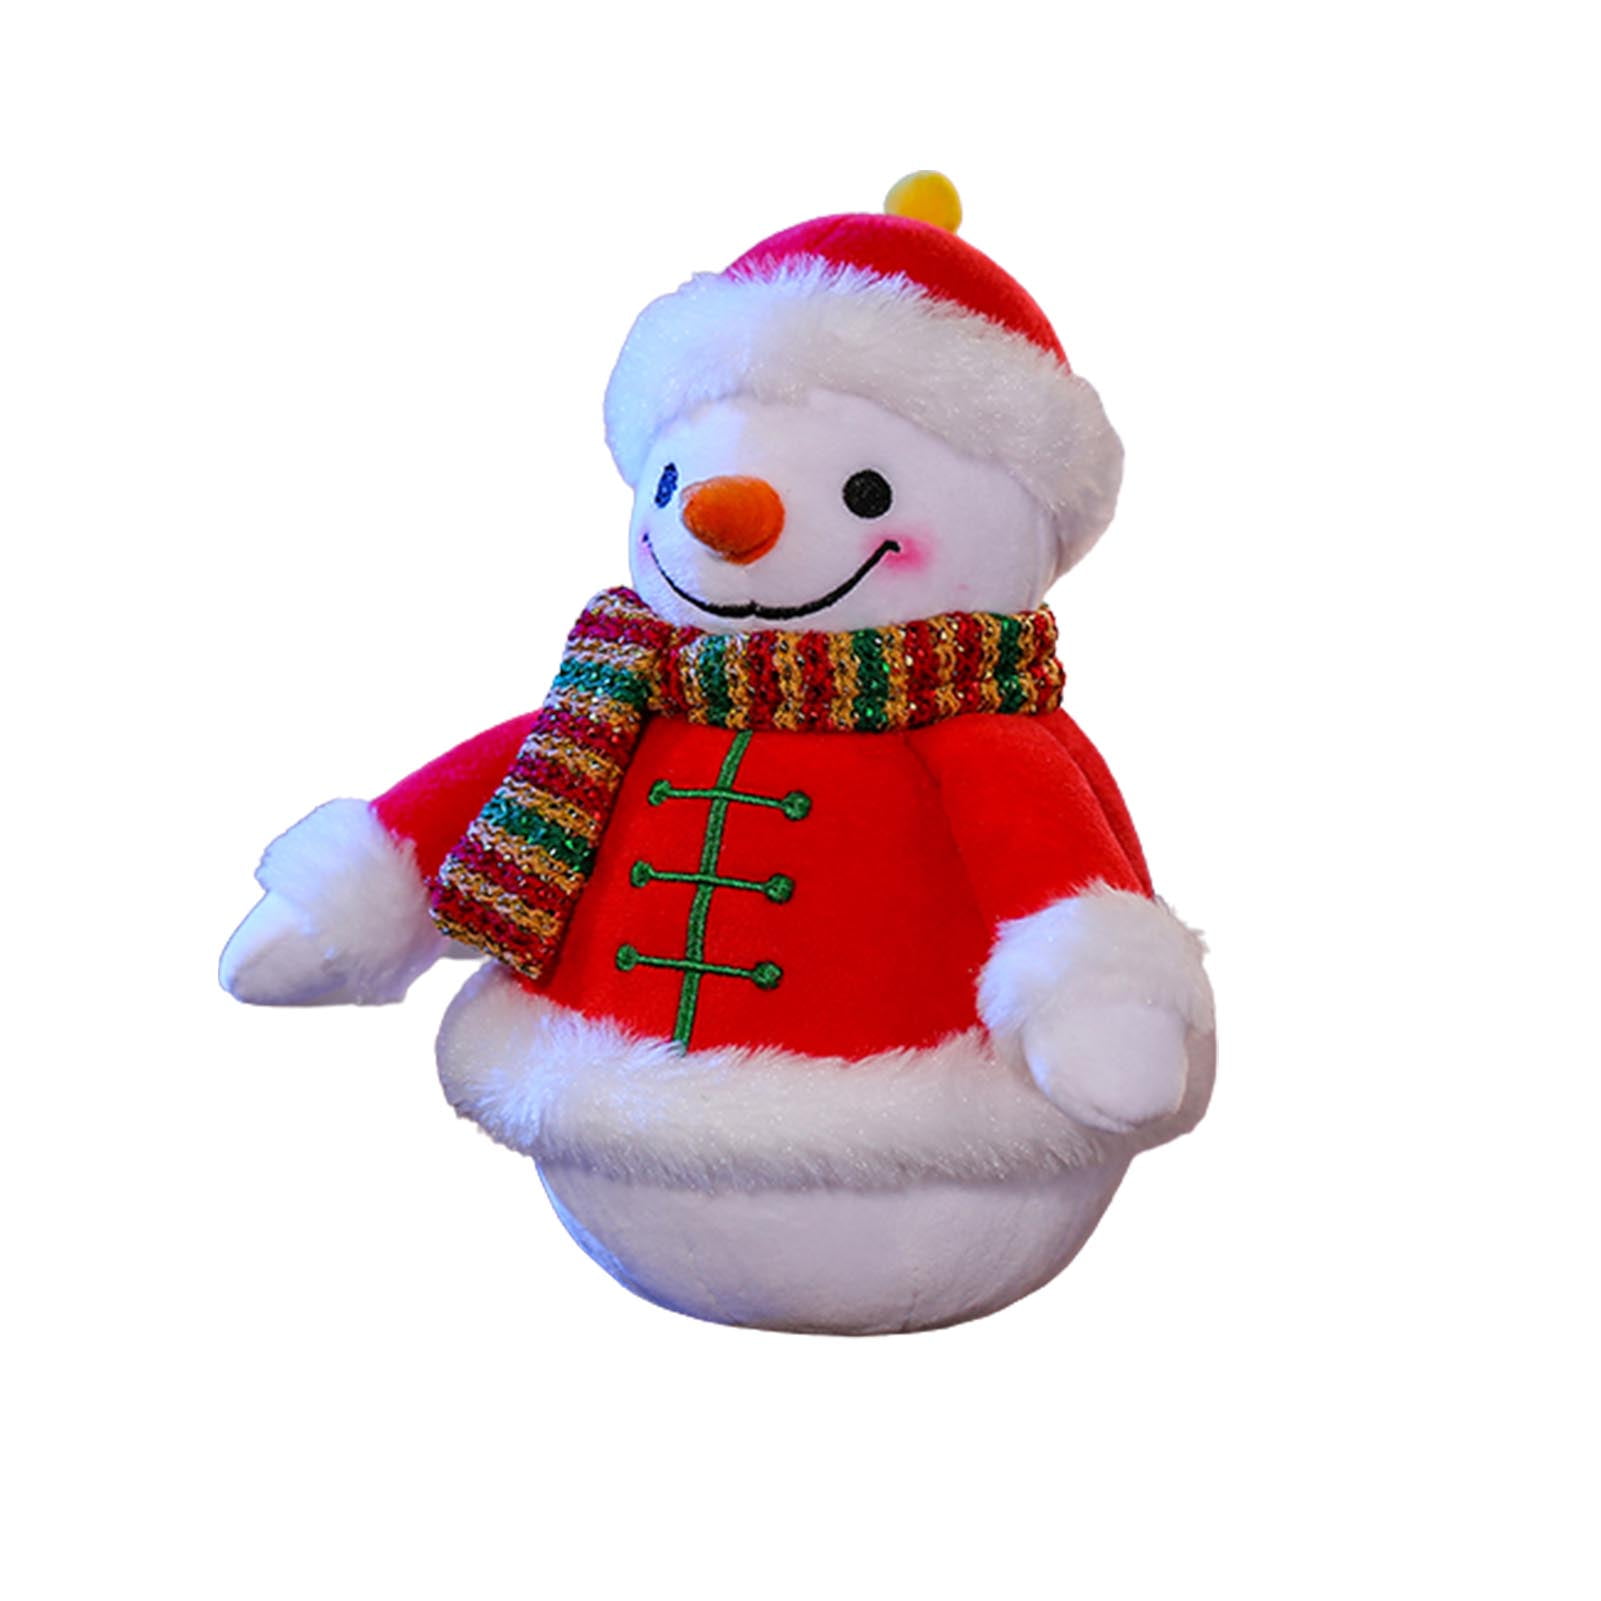 THE SNOWMAN COLLECTOR EDITION 25CM PLUSH IN GIFT BOX SOFT TOY NEW CHRISTMAS 